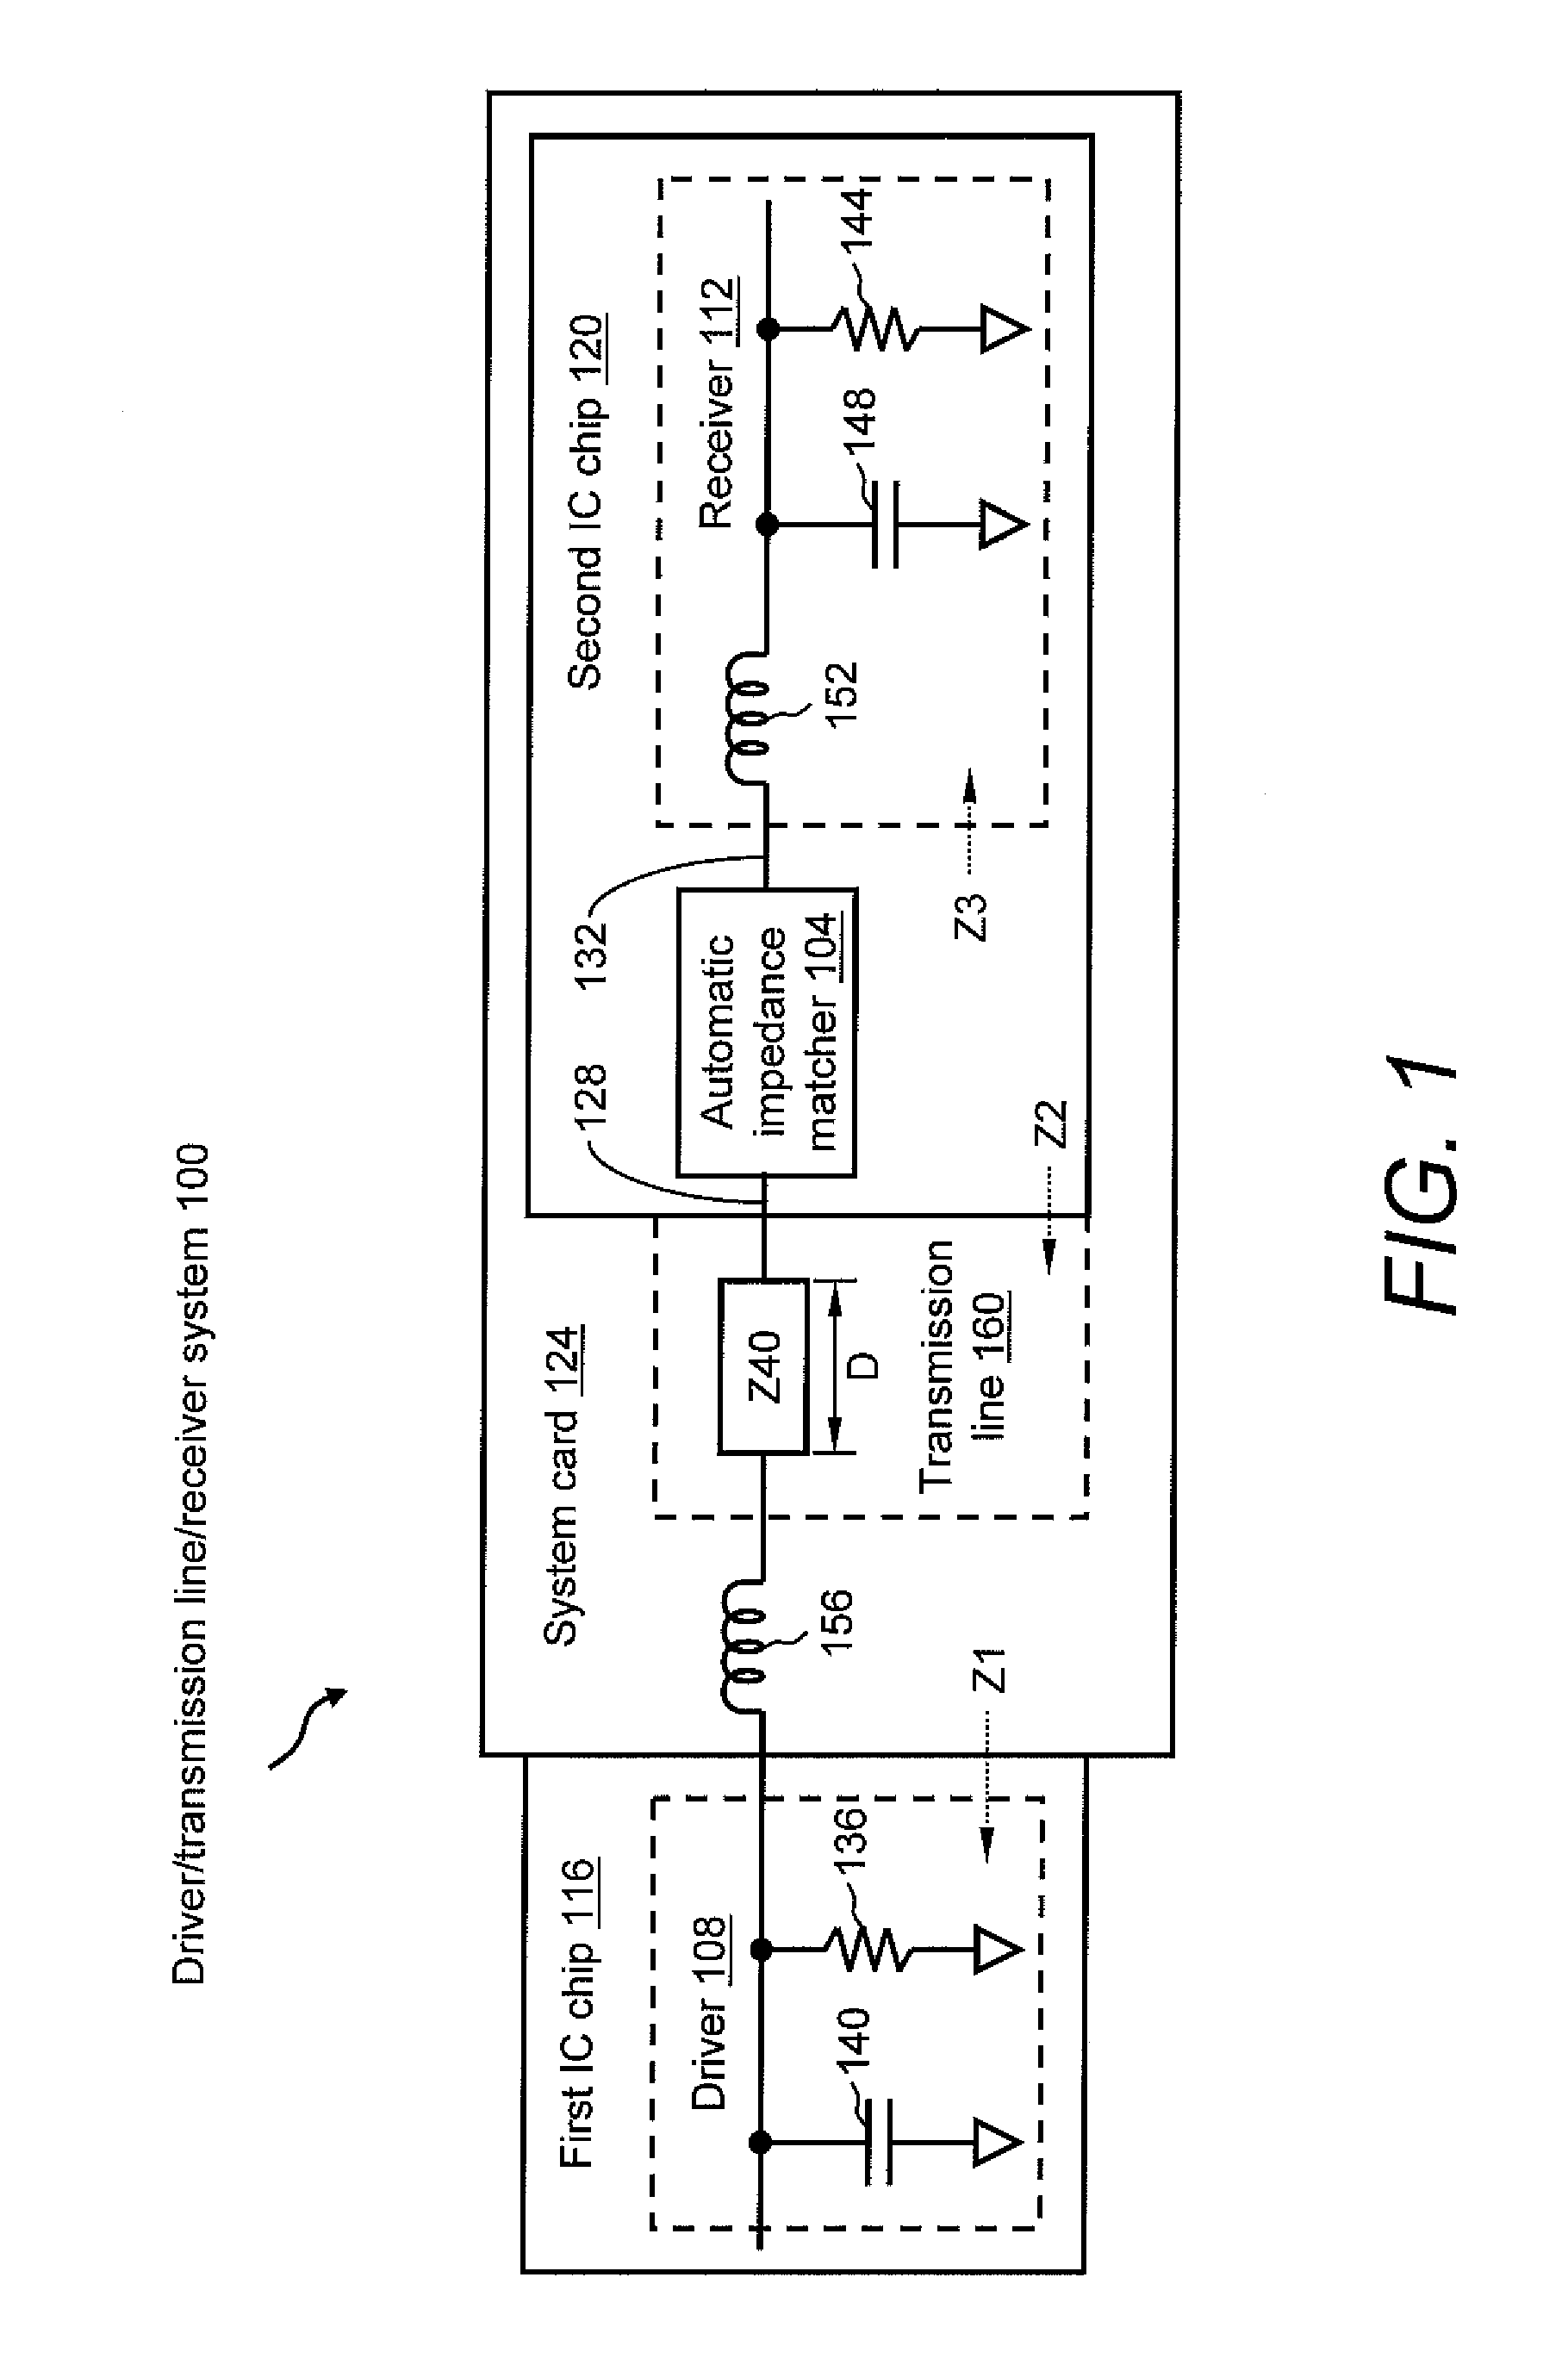 Design Structure for an Automatic Driver/Transmission Line/Receiver Impedance Matching Circuitry